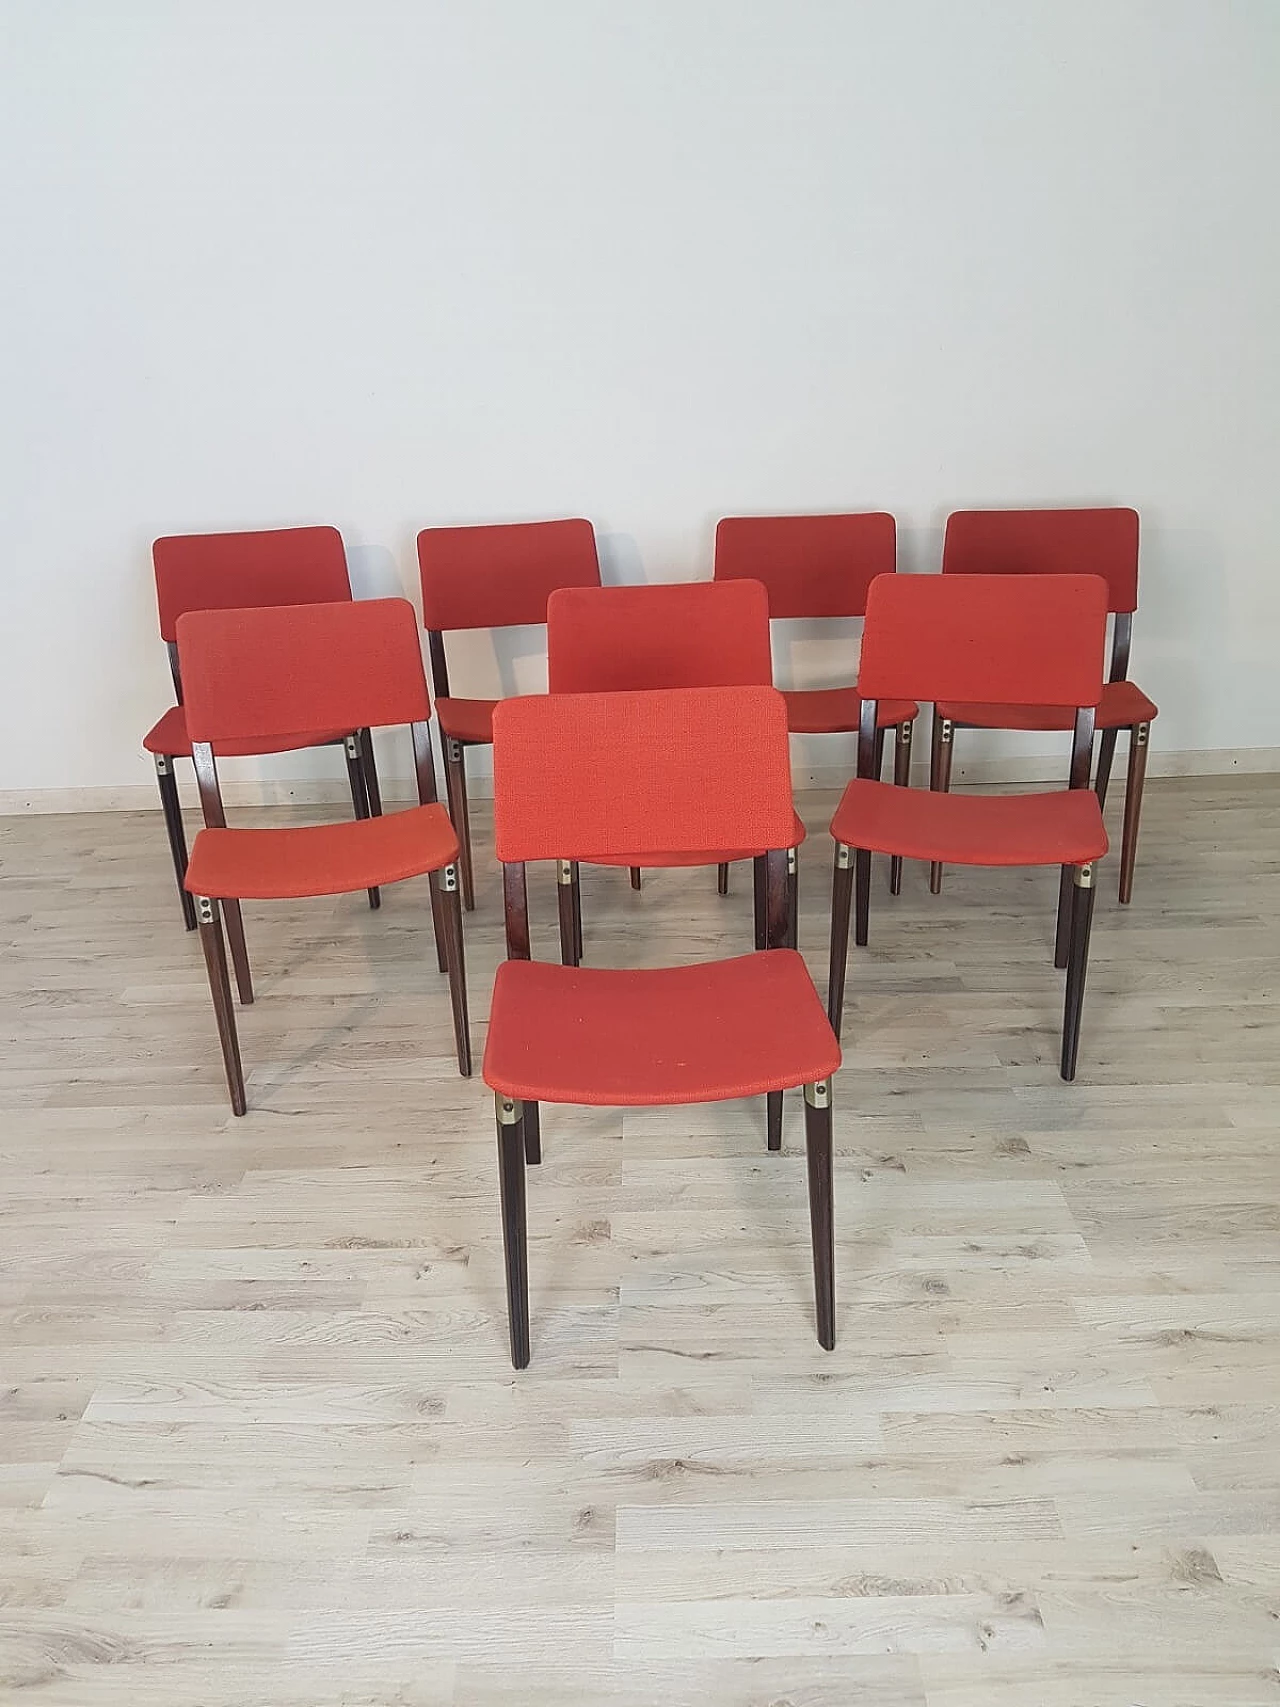 Set of 8 chairs "S82" by Eugenio Gerli for Tecno 4